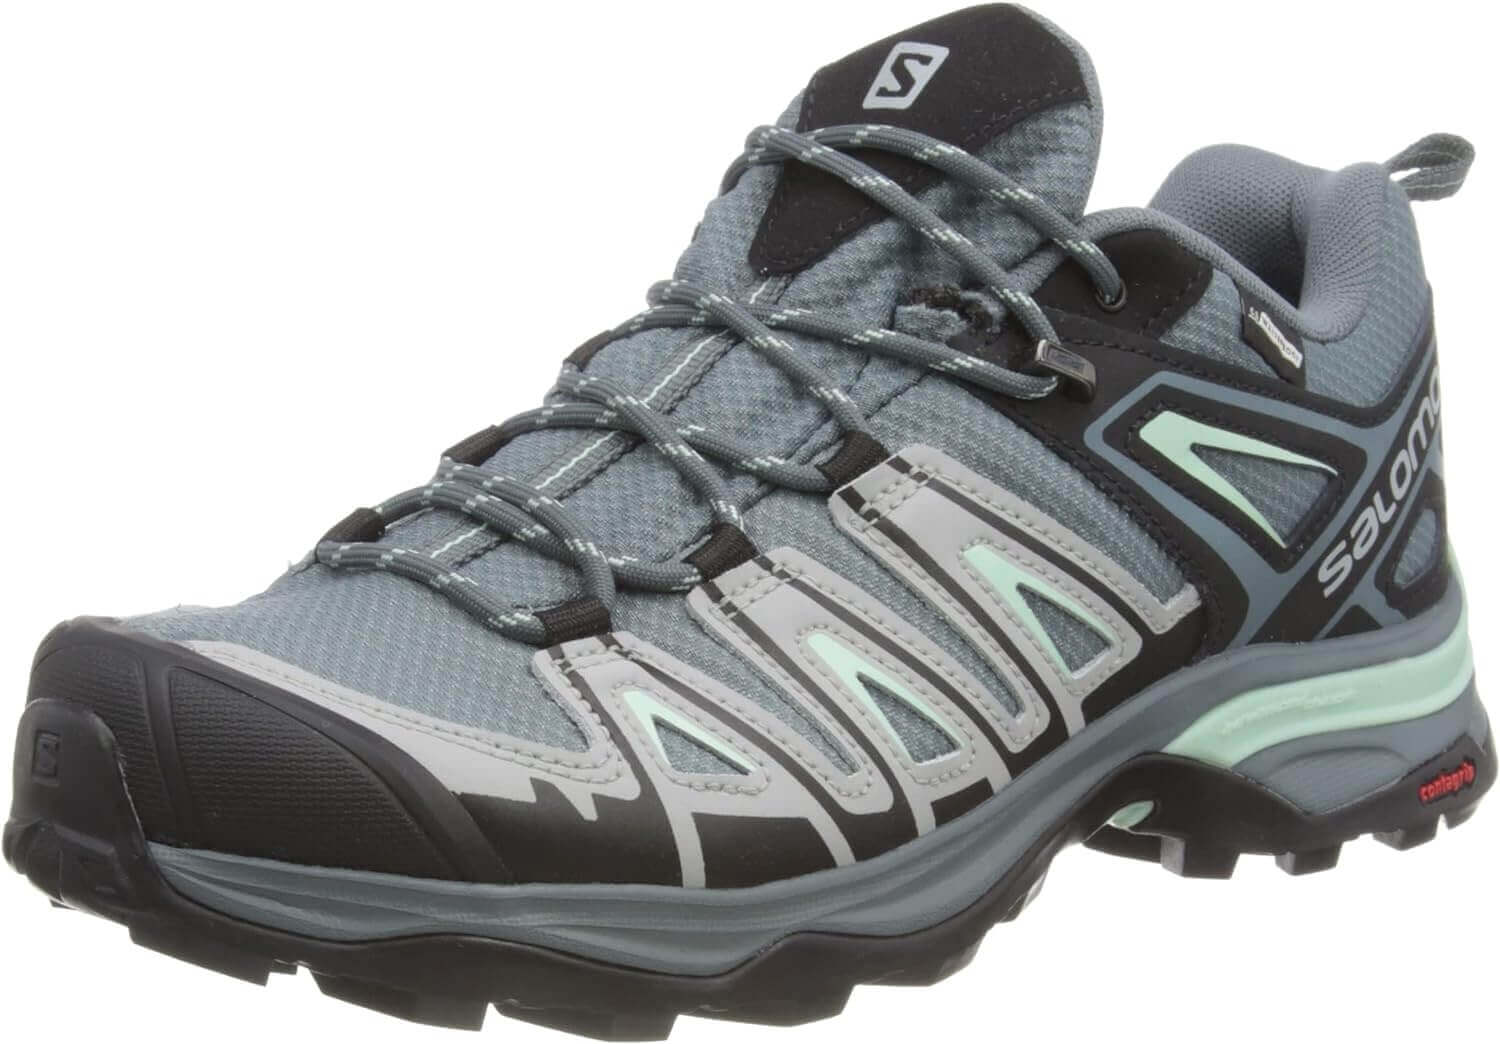 Shop The Latest >Salomon Women's X Ultra Pioneer Waterproof Hiking Shoes > *Only $188.93*> From The Top Brand > *Salomonl* > Shop Now and Get Free Shipping On Orders Over $45.00 >*Shop Earth Foot*